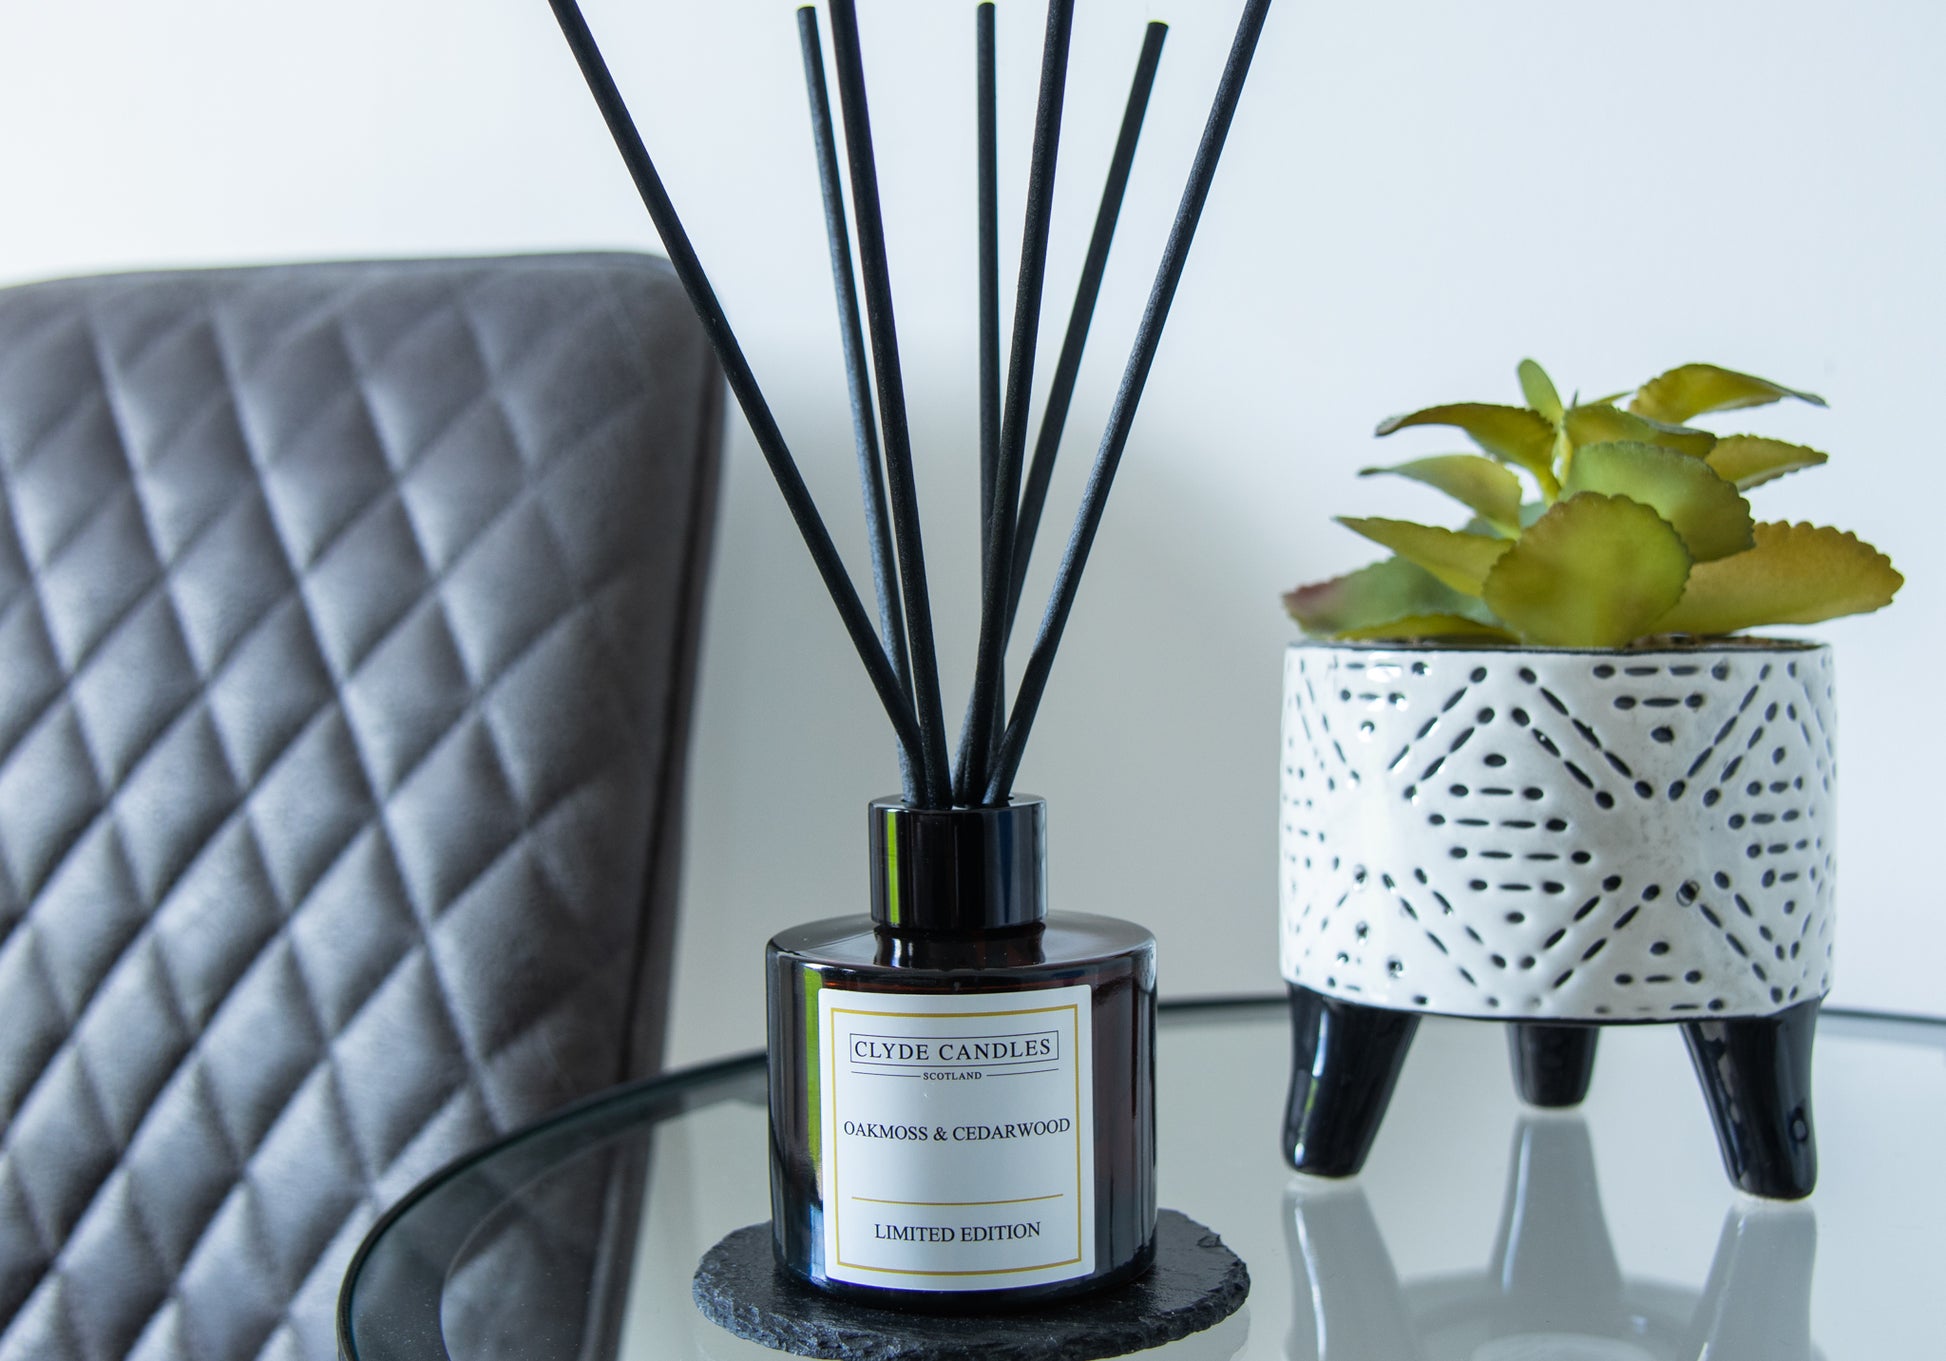 oakmoss & cedarwood Reed Diffuser - Clyde Candles, Luxury Diffuser Oil with a Set of 7 Fibre Sticks, 100ml, Best Aroma Scent for Home, Kitchen, Living Room, Bathroom. Fragrance Diffusers set with sticks